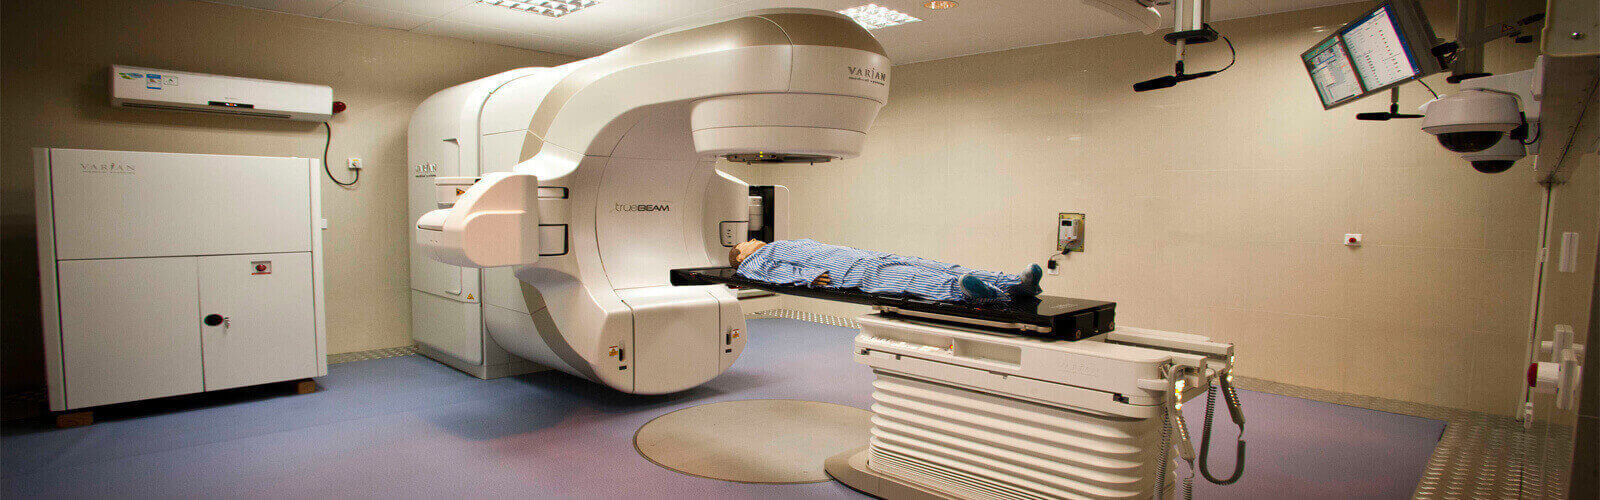 Radiotherapy in Lesotho